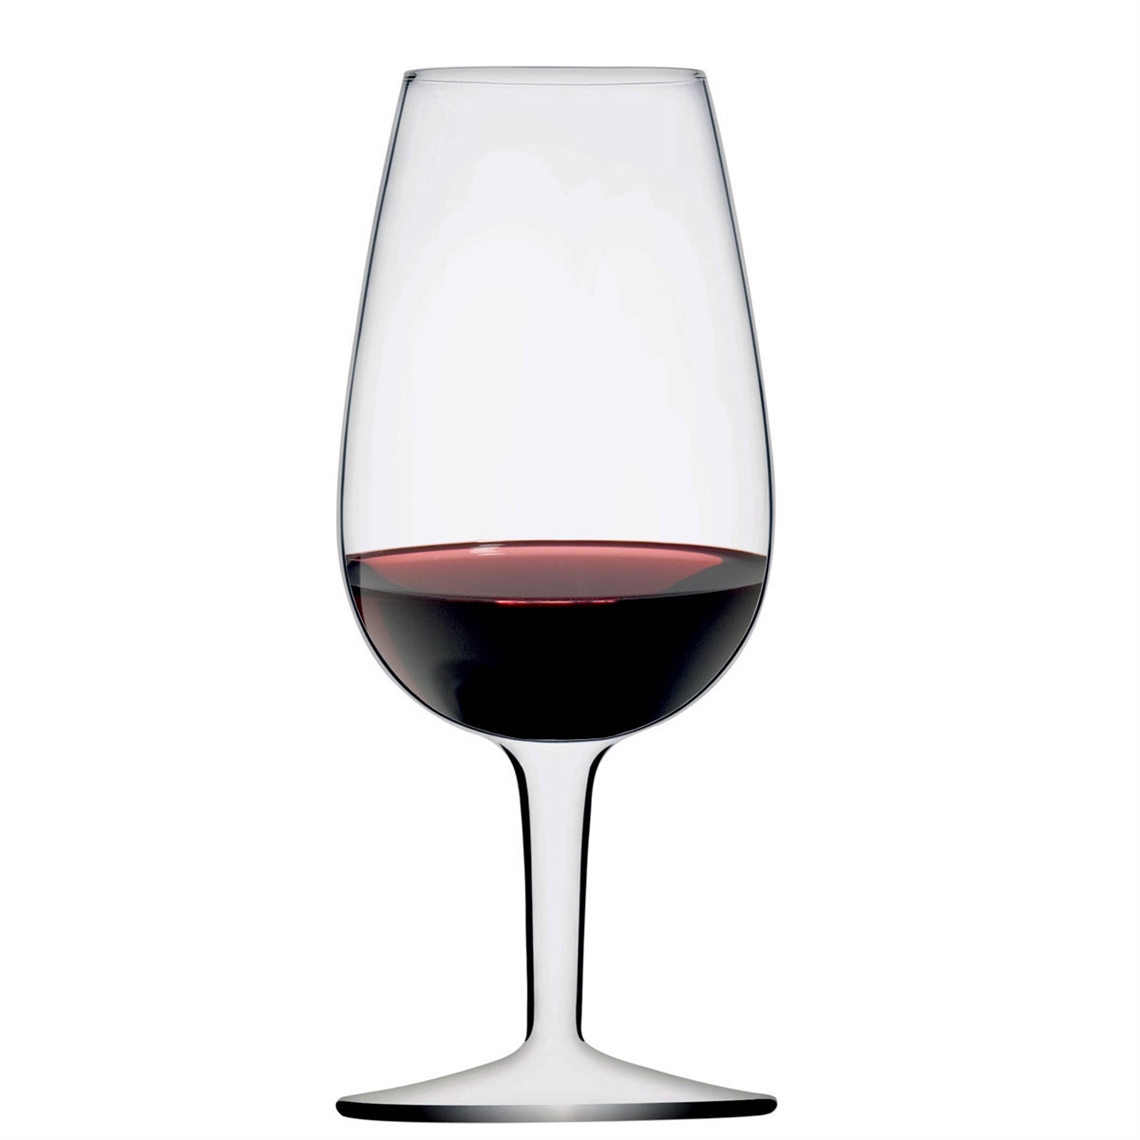 View more red wine glasses from our Wine Tasting Glasses range